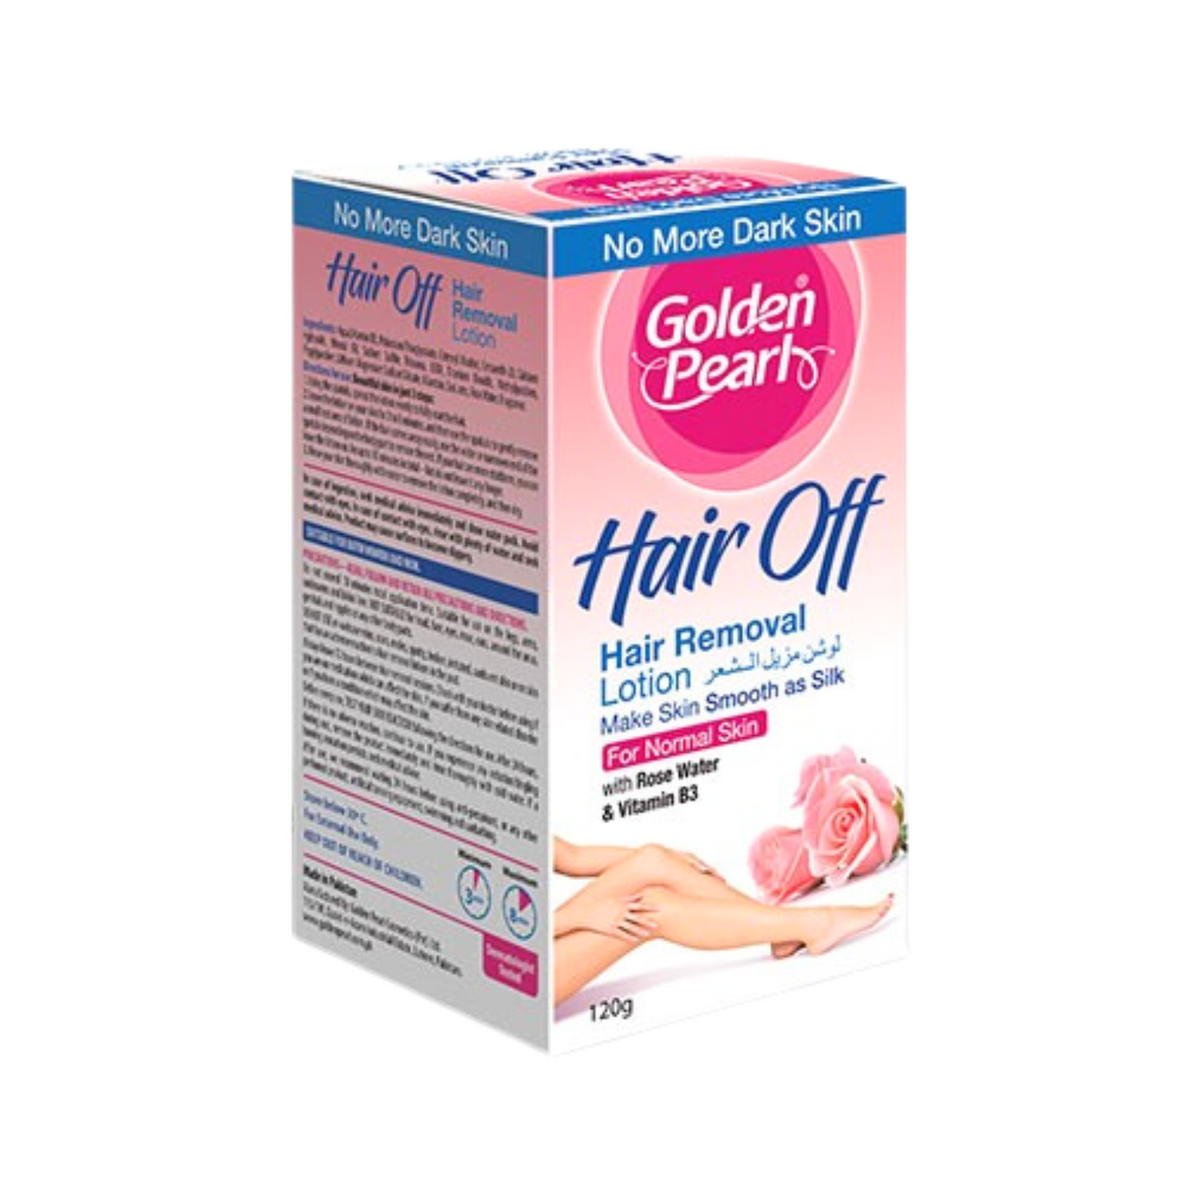 golden-pearl-hair-off-hair-removal-lotion-for-normal-skin-120g